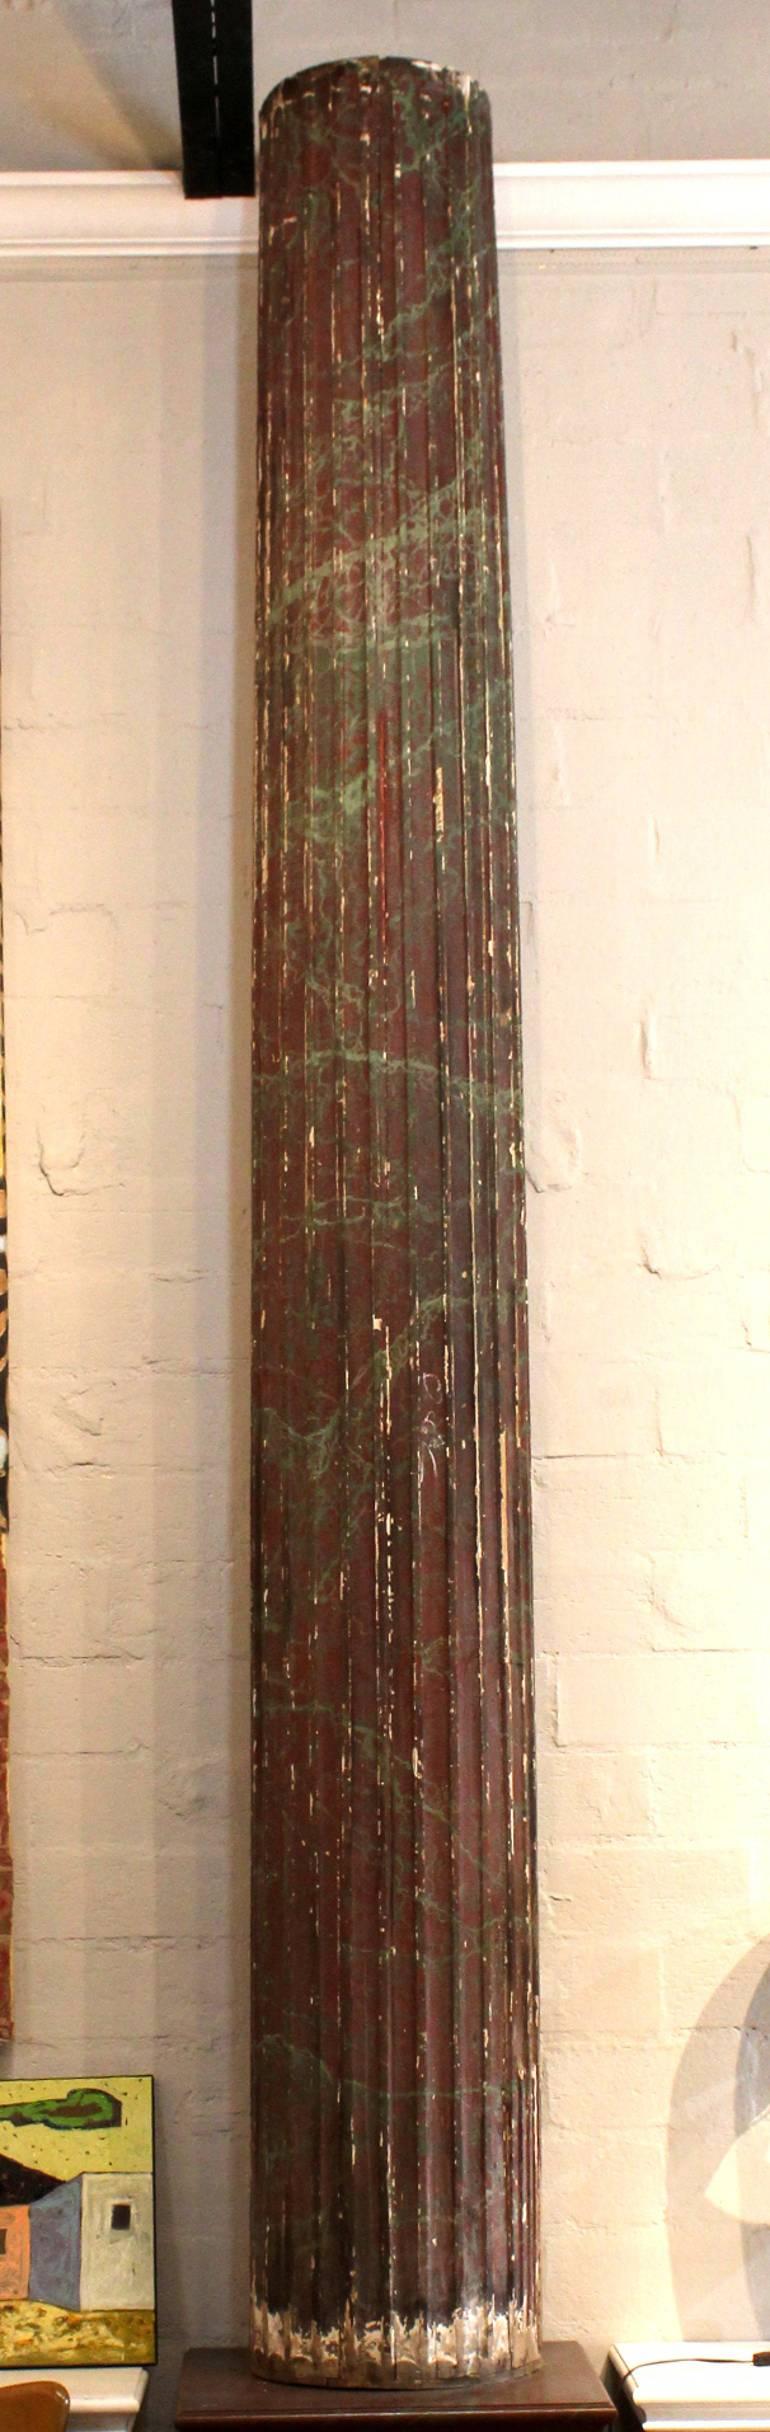 Italian wood columns from the early 1800's with a beautiful time-worn hand-painted faux marble finish. The columns have half narrow half wide channels (see pictures). Columns only, no base or capital.